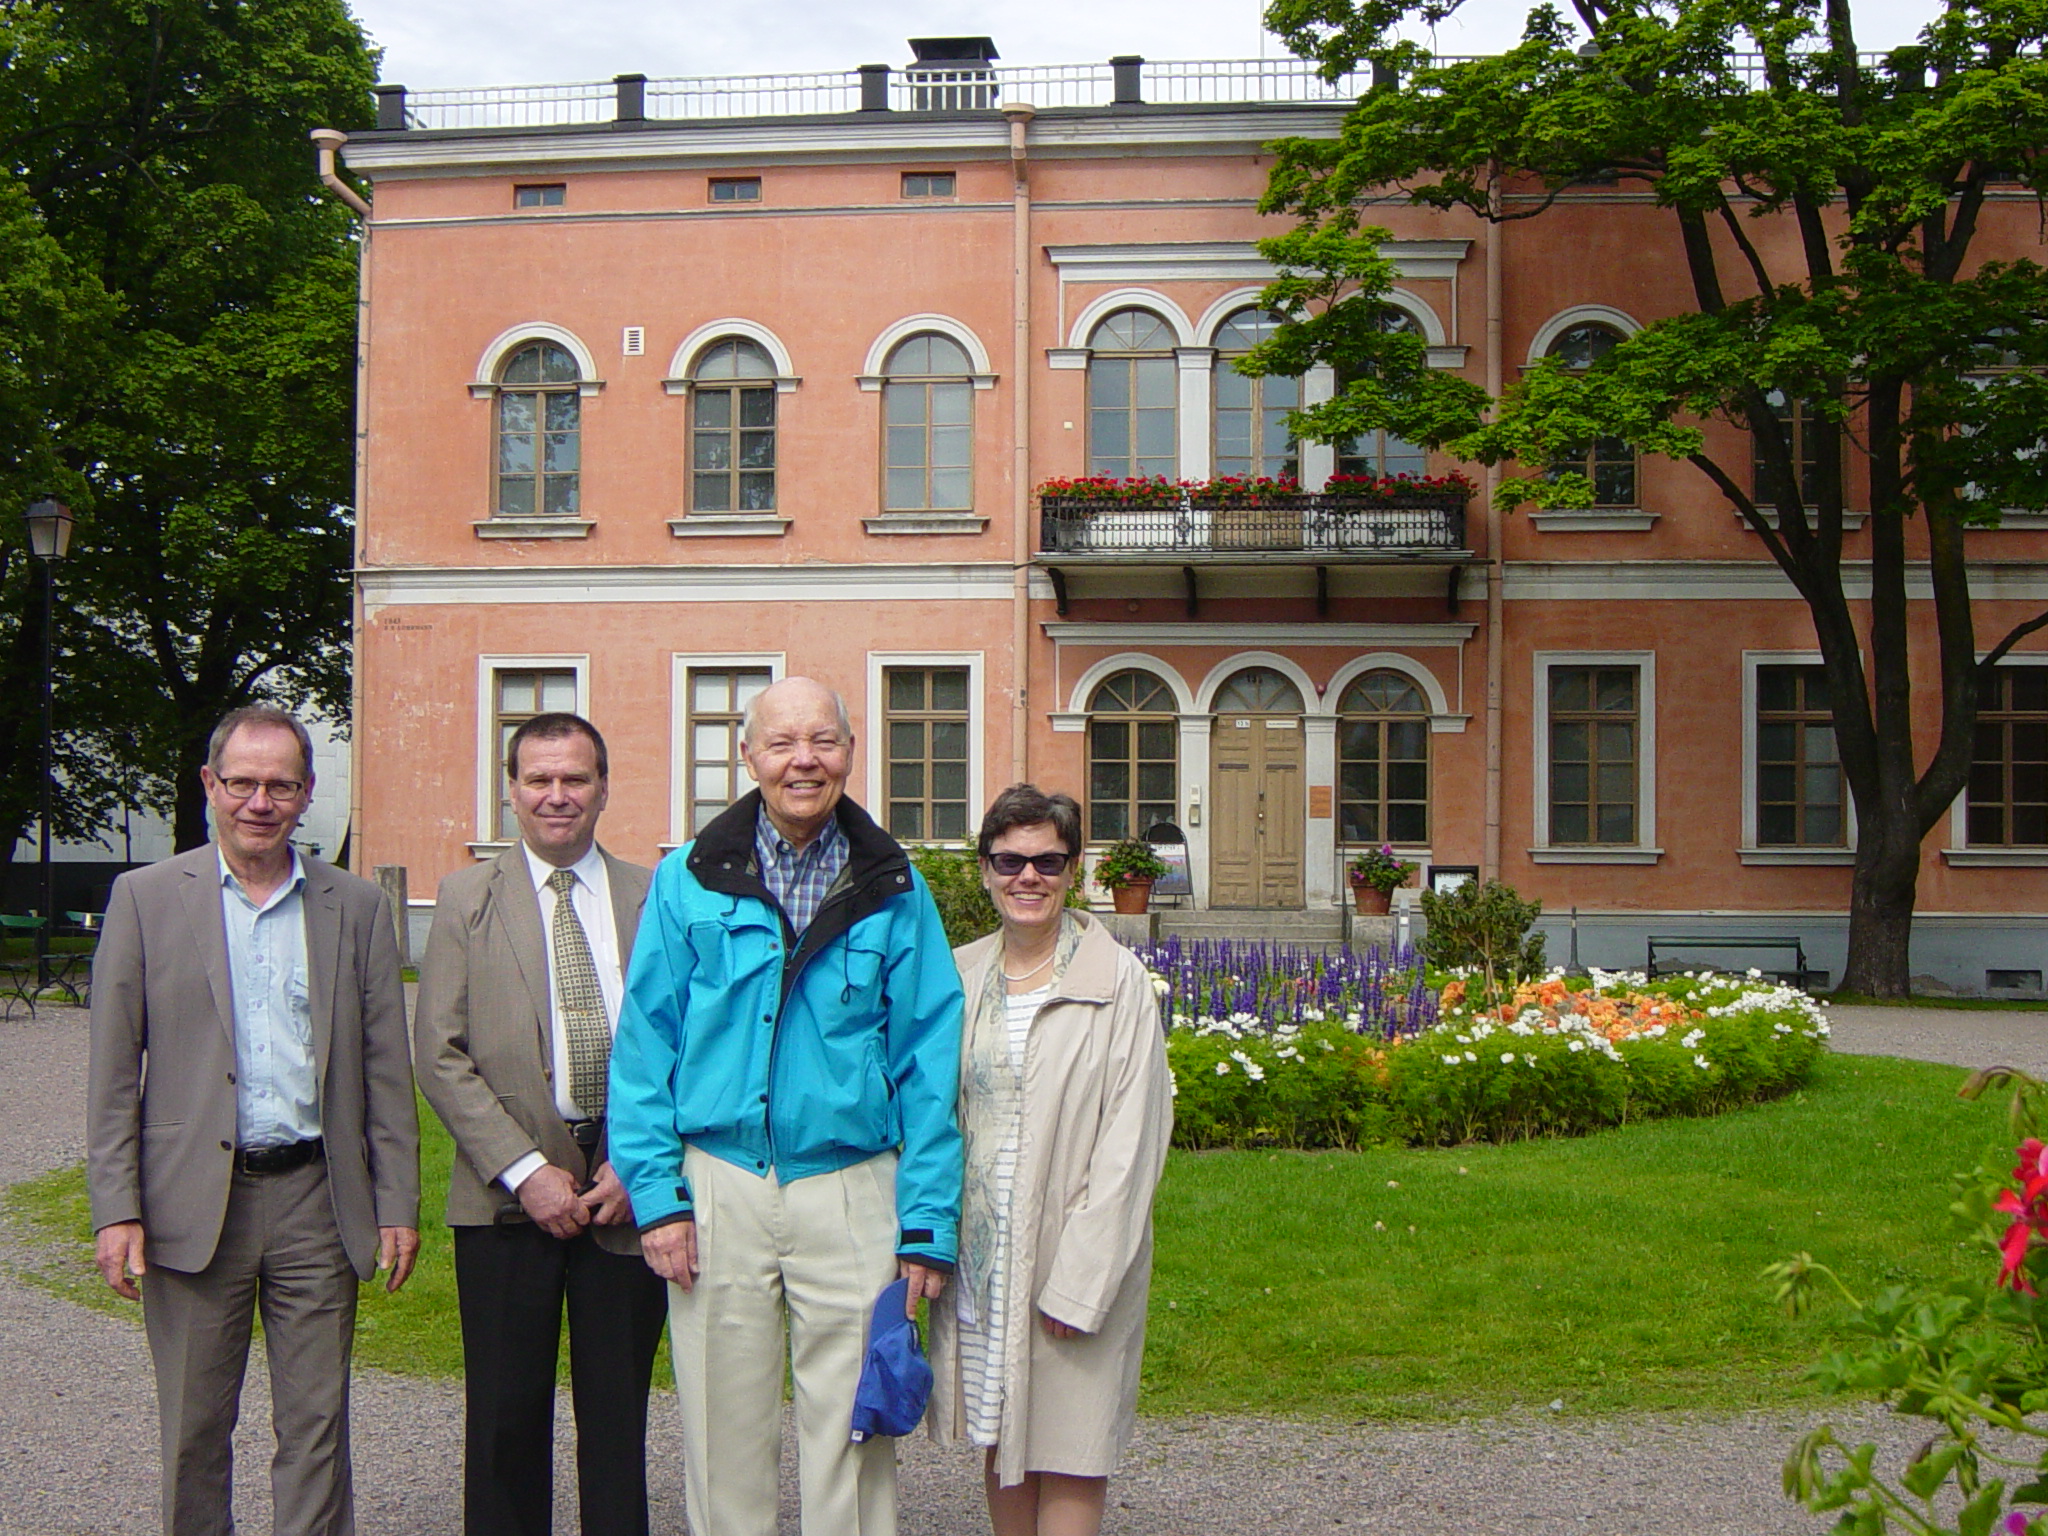 John A. Koskinen with his tour guides in a picture taken in front of a house previously owned by a Finnish woman who went to Siberia to make her fortune by marrying wealthy men.